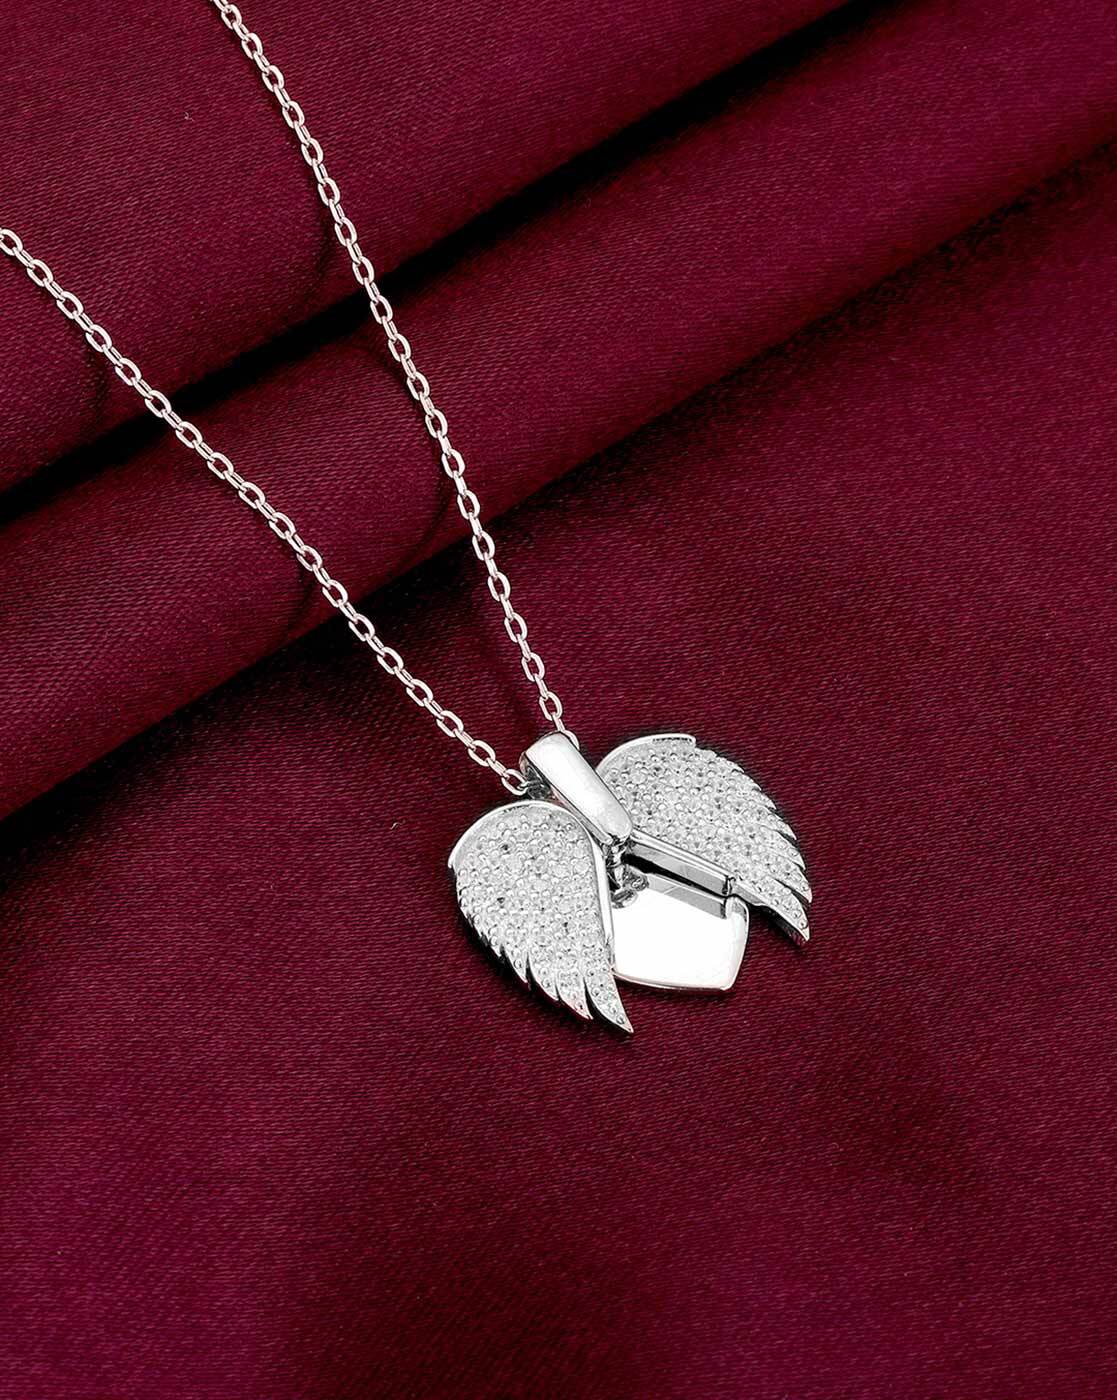 Buy 925 Flying Heart Necklace, Angel Wing Heart Pendant Necklace With  Sterling Squared Cable Chain and Infinity Clasp and Link Close, Free Ship  Online in India - Etsy